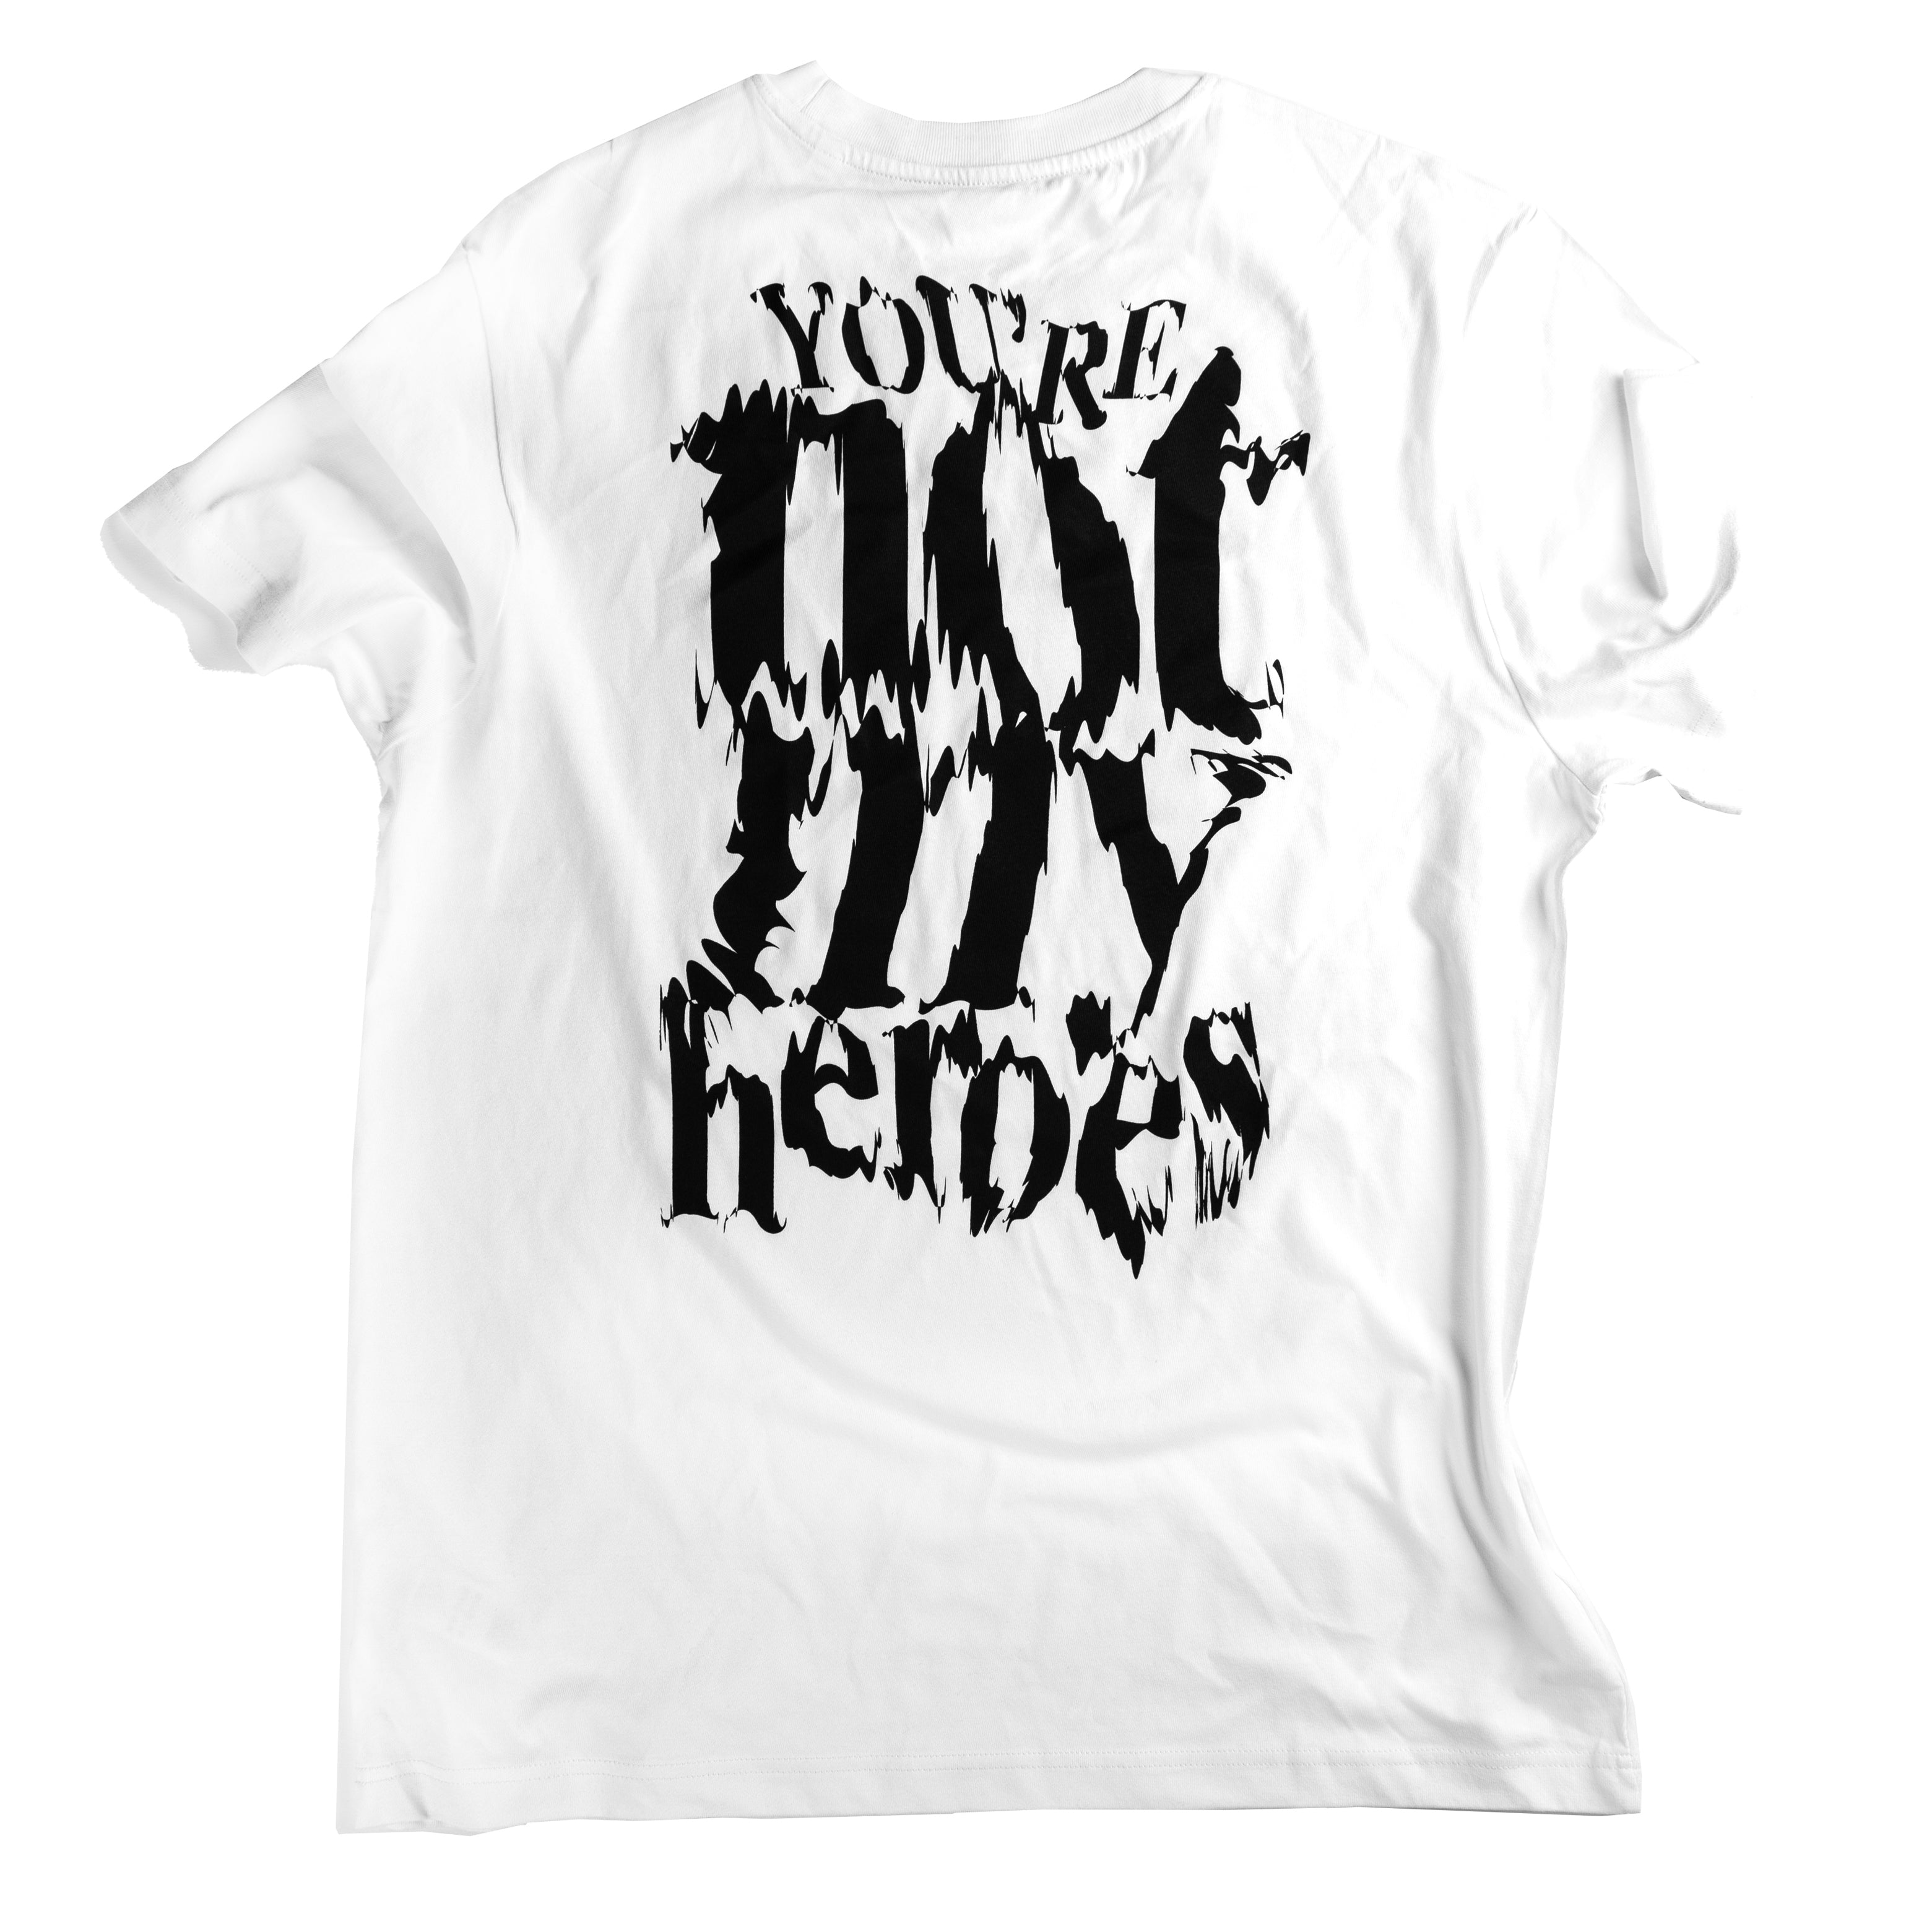 "You're not my heroes!" - T-Shirt - White